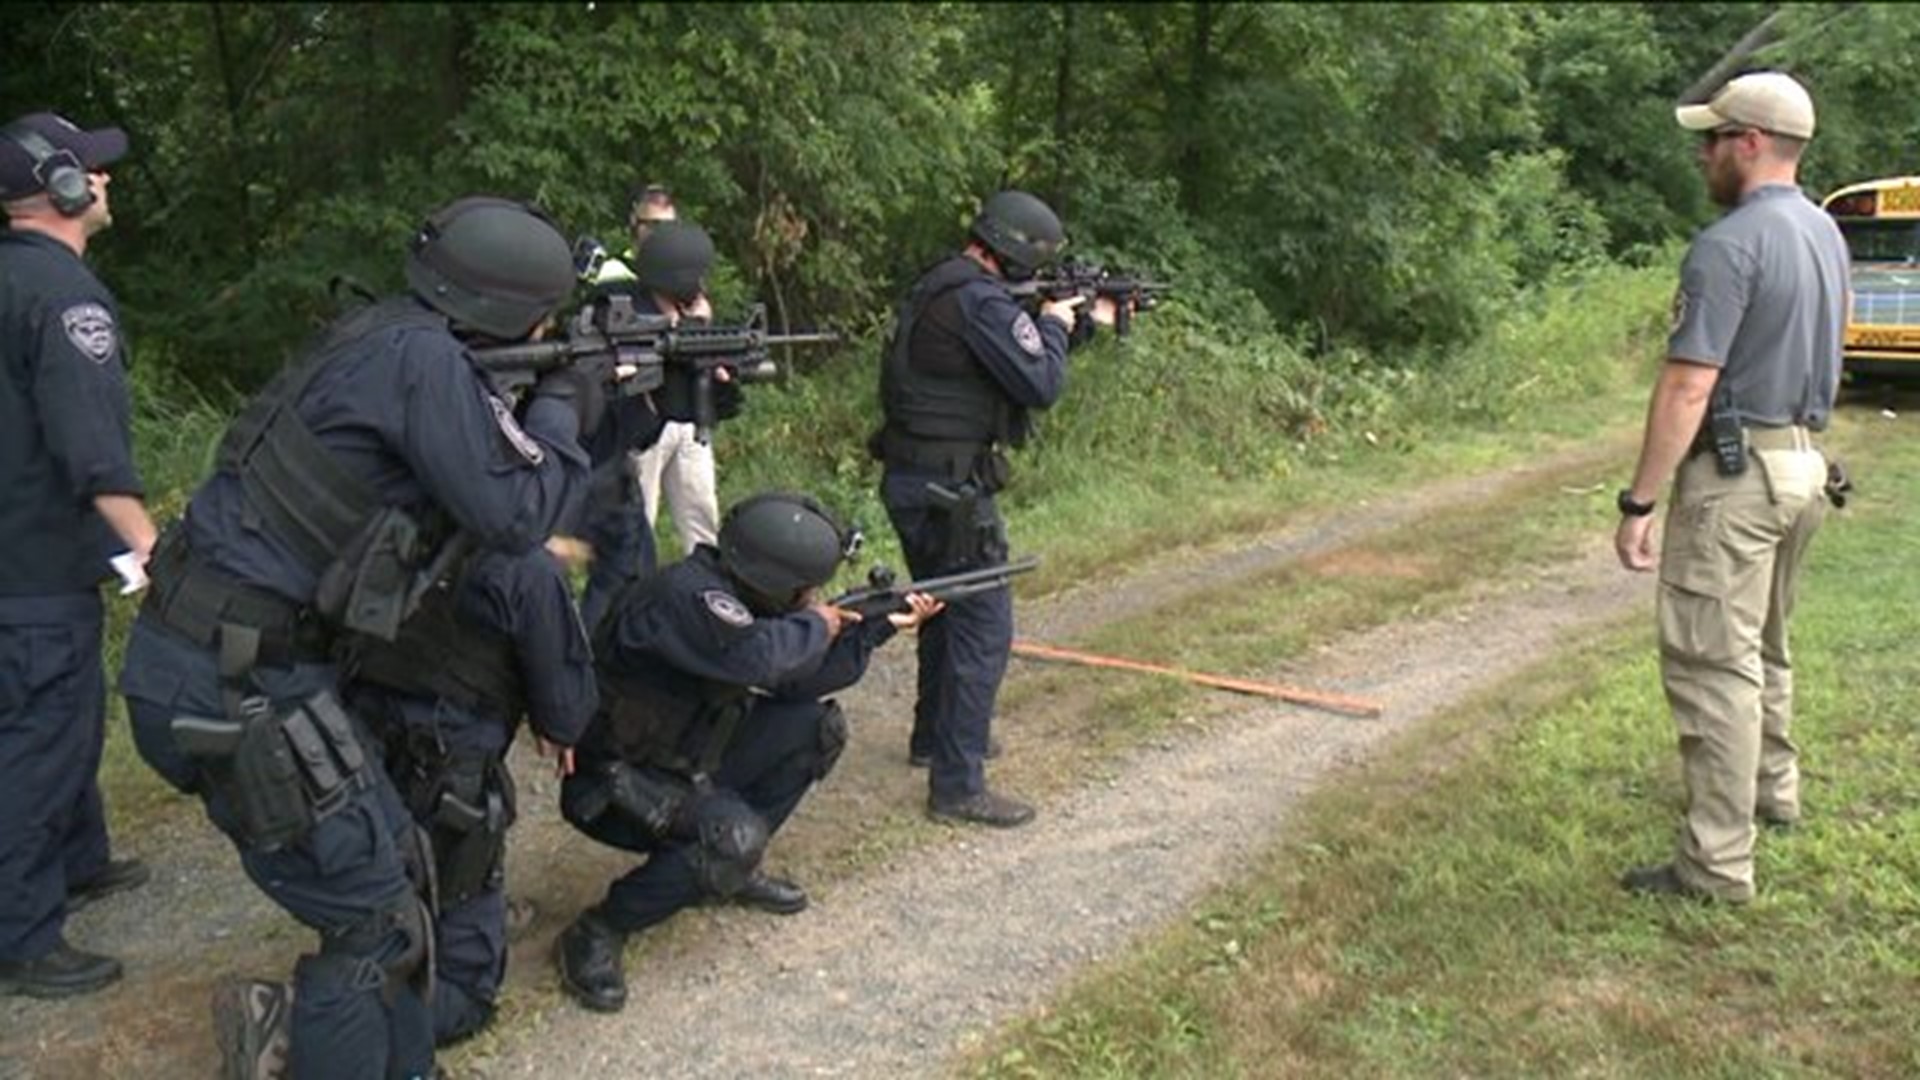 SWAT Challenge Reloads For 10th Year